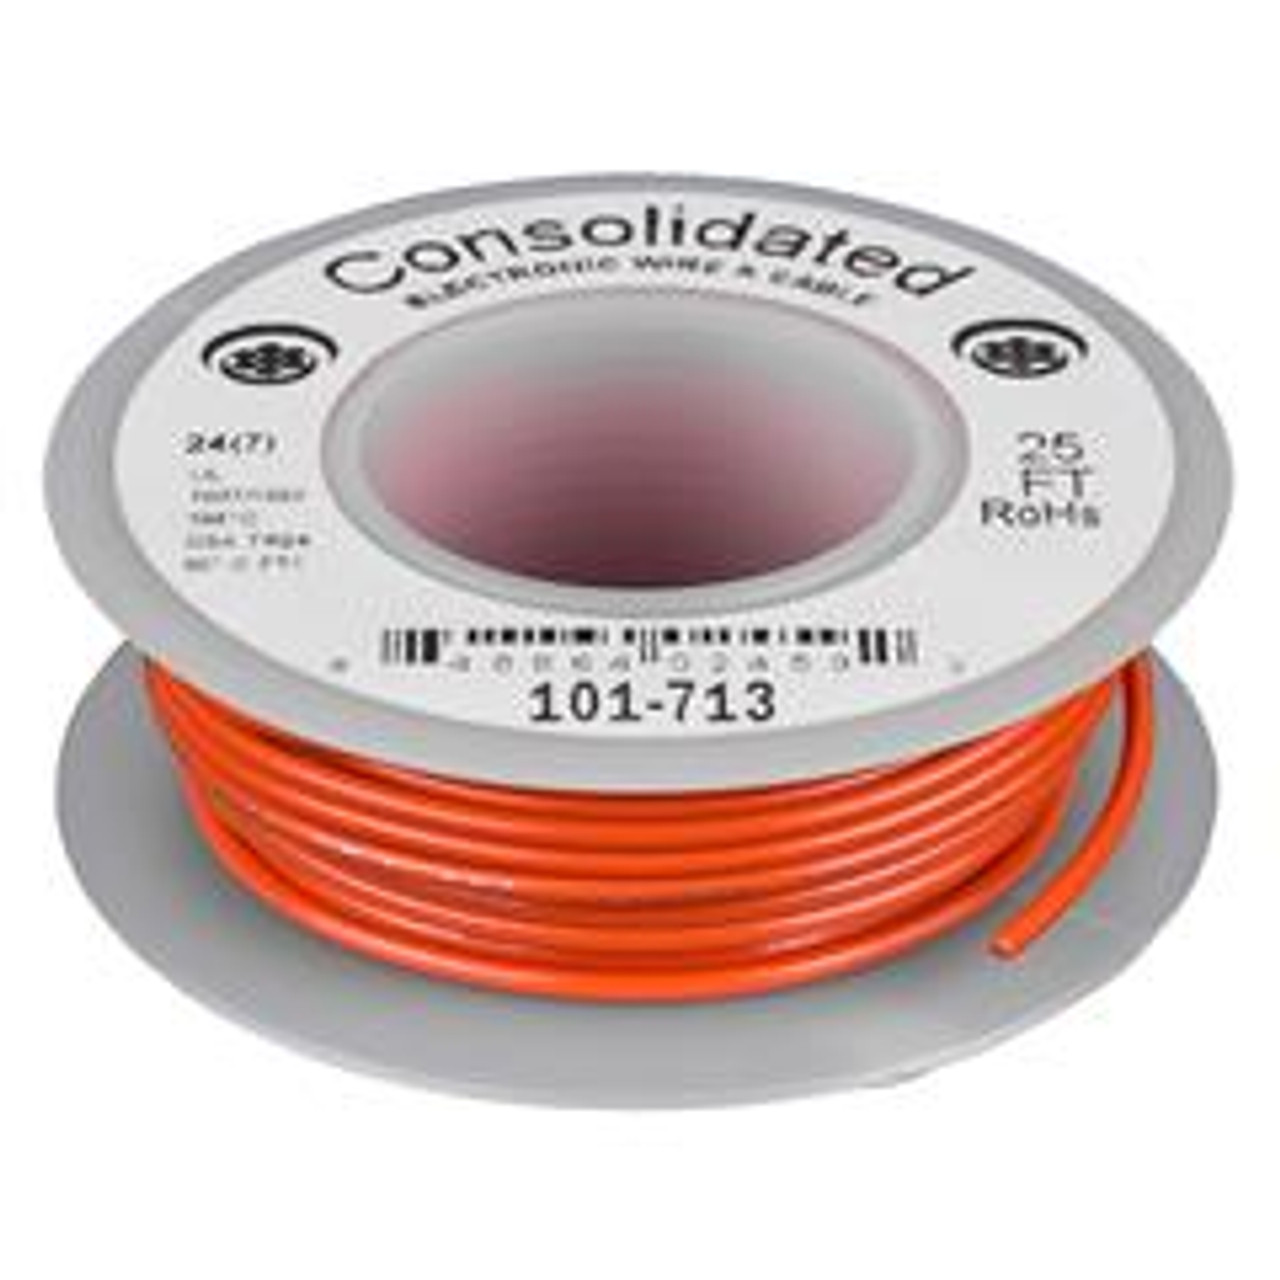 Made In USA 18 AWG, 16 Strand, 100' OAL, Tinned Copper Hook, 53% OFF